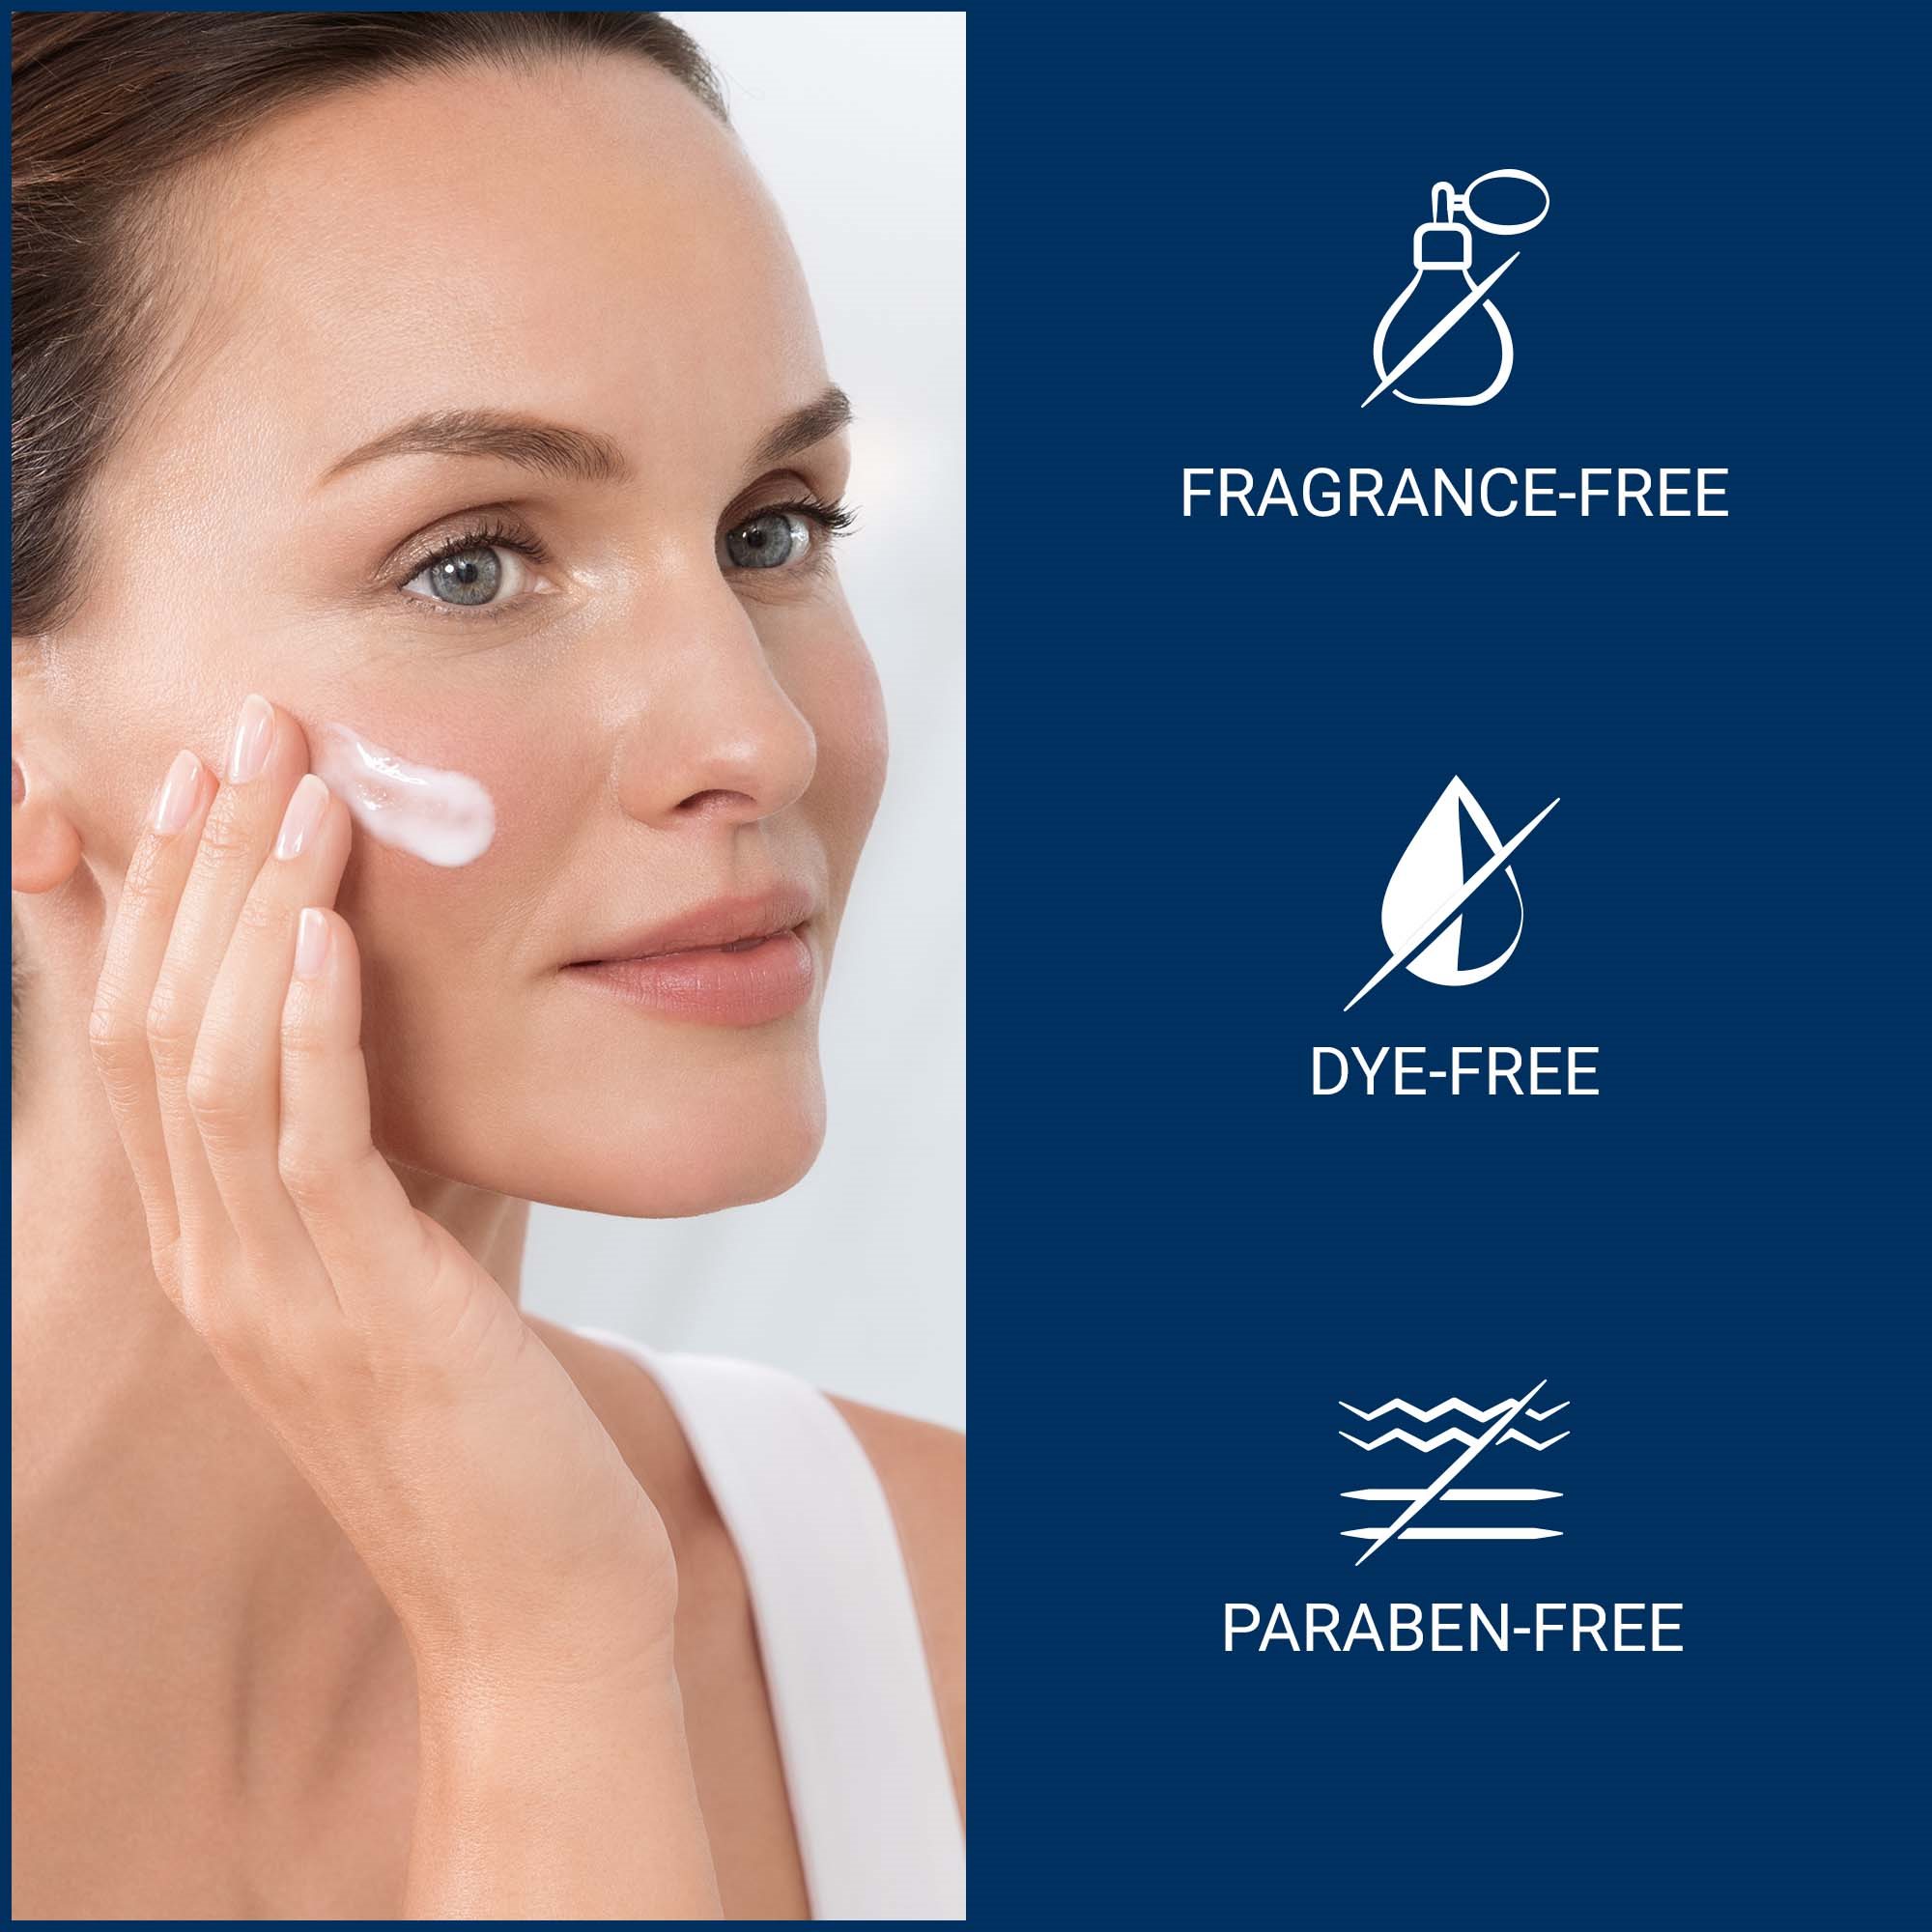 View of model applying Eucerin Urea Repair replenishing face cream to face with text against a blue background.